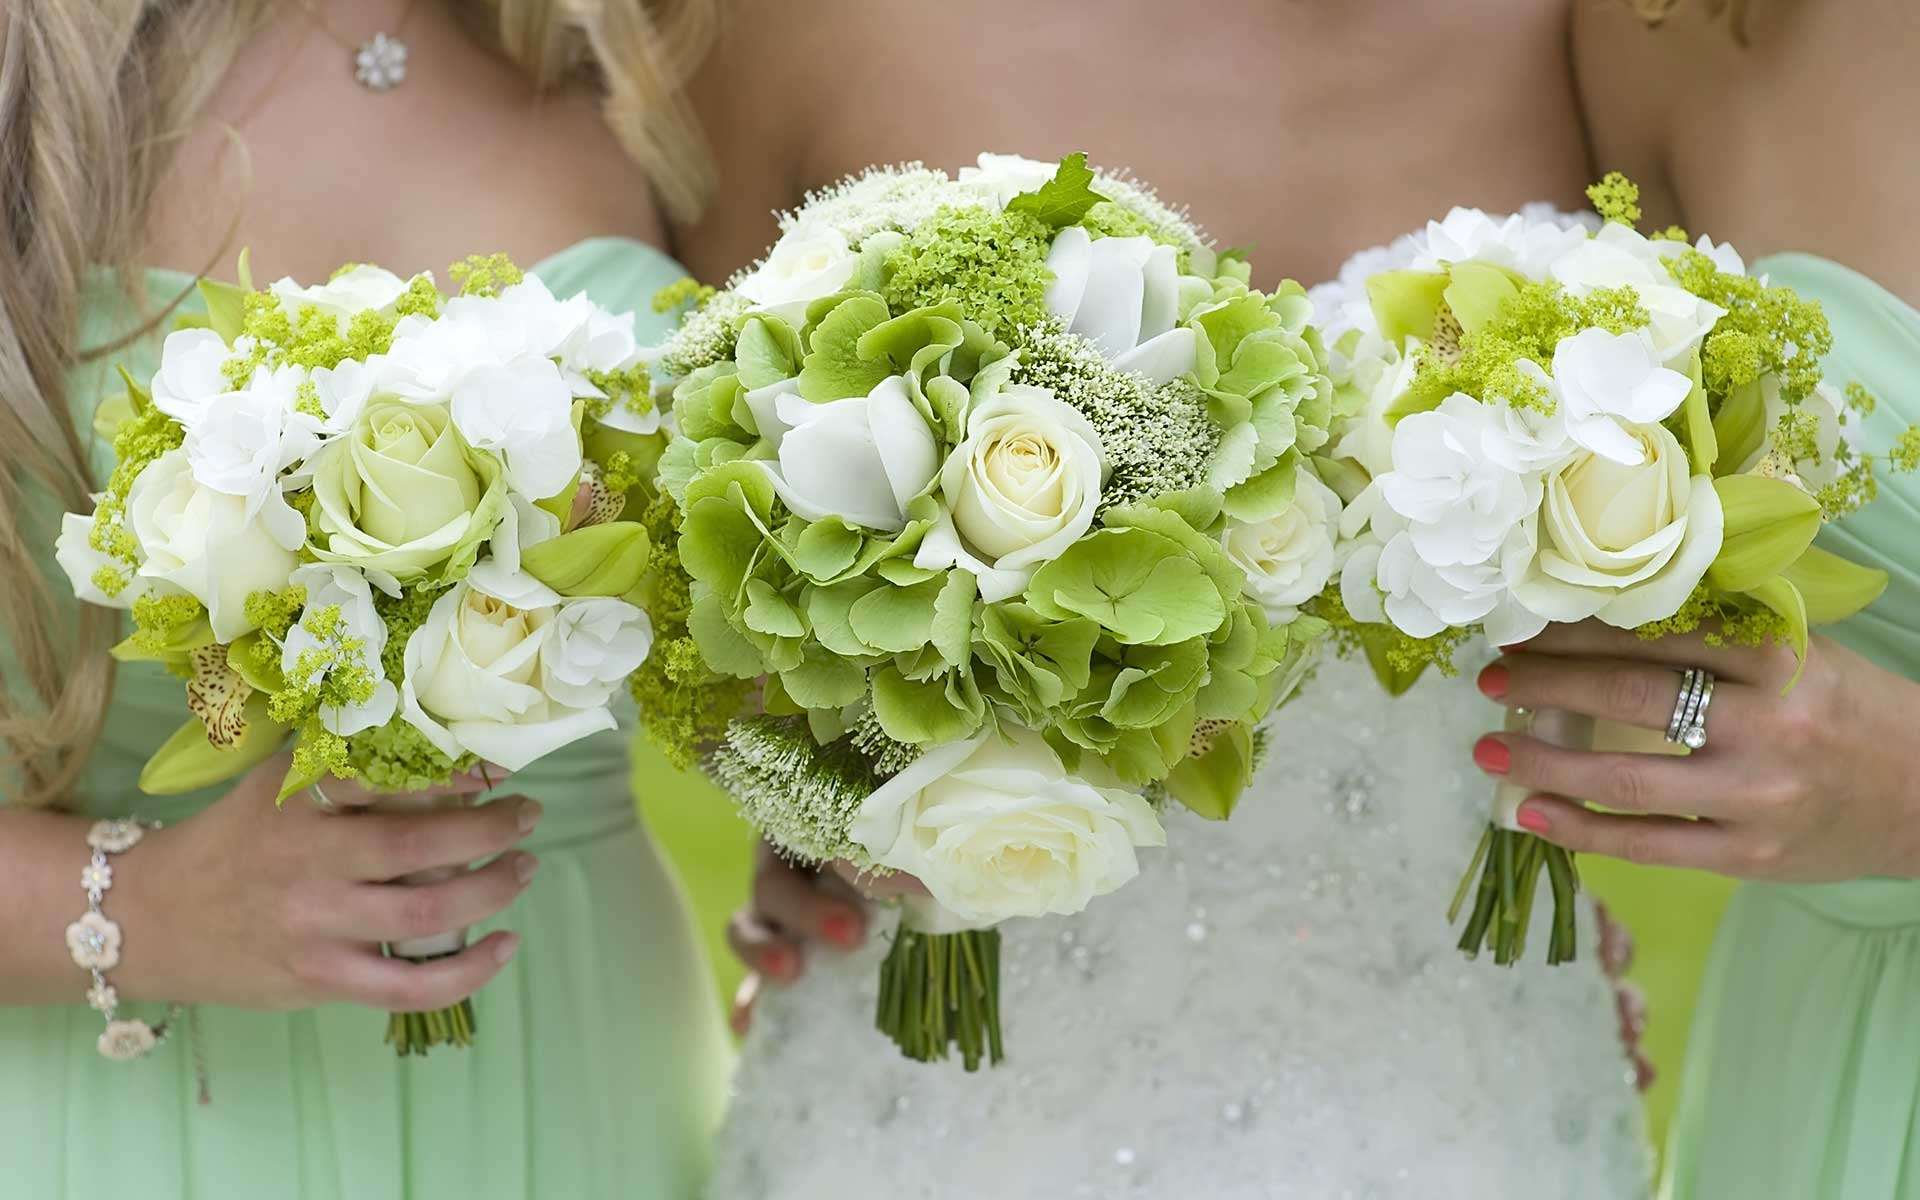 White-Roses-Seamlessly-Peak-Through-Green-Hydrangeas-A-Pinch-Of-Baby’s-Breath-Adds-Texture-To-These-Bridal-Bouquets